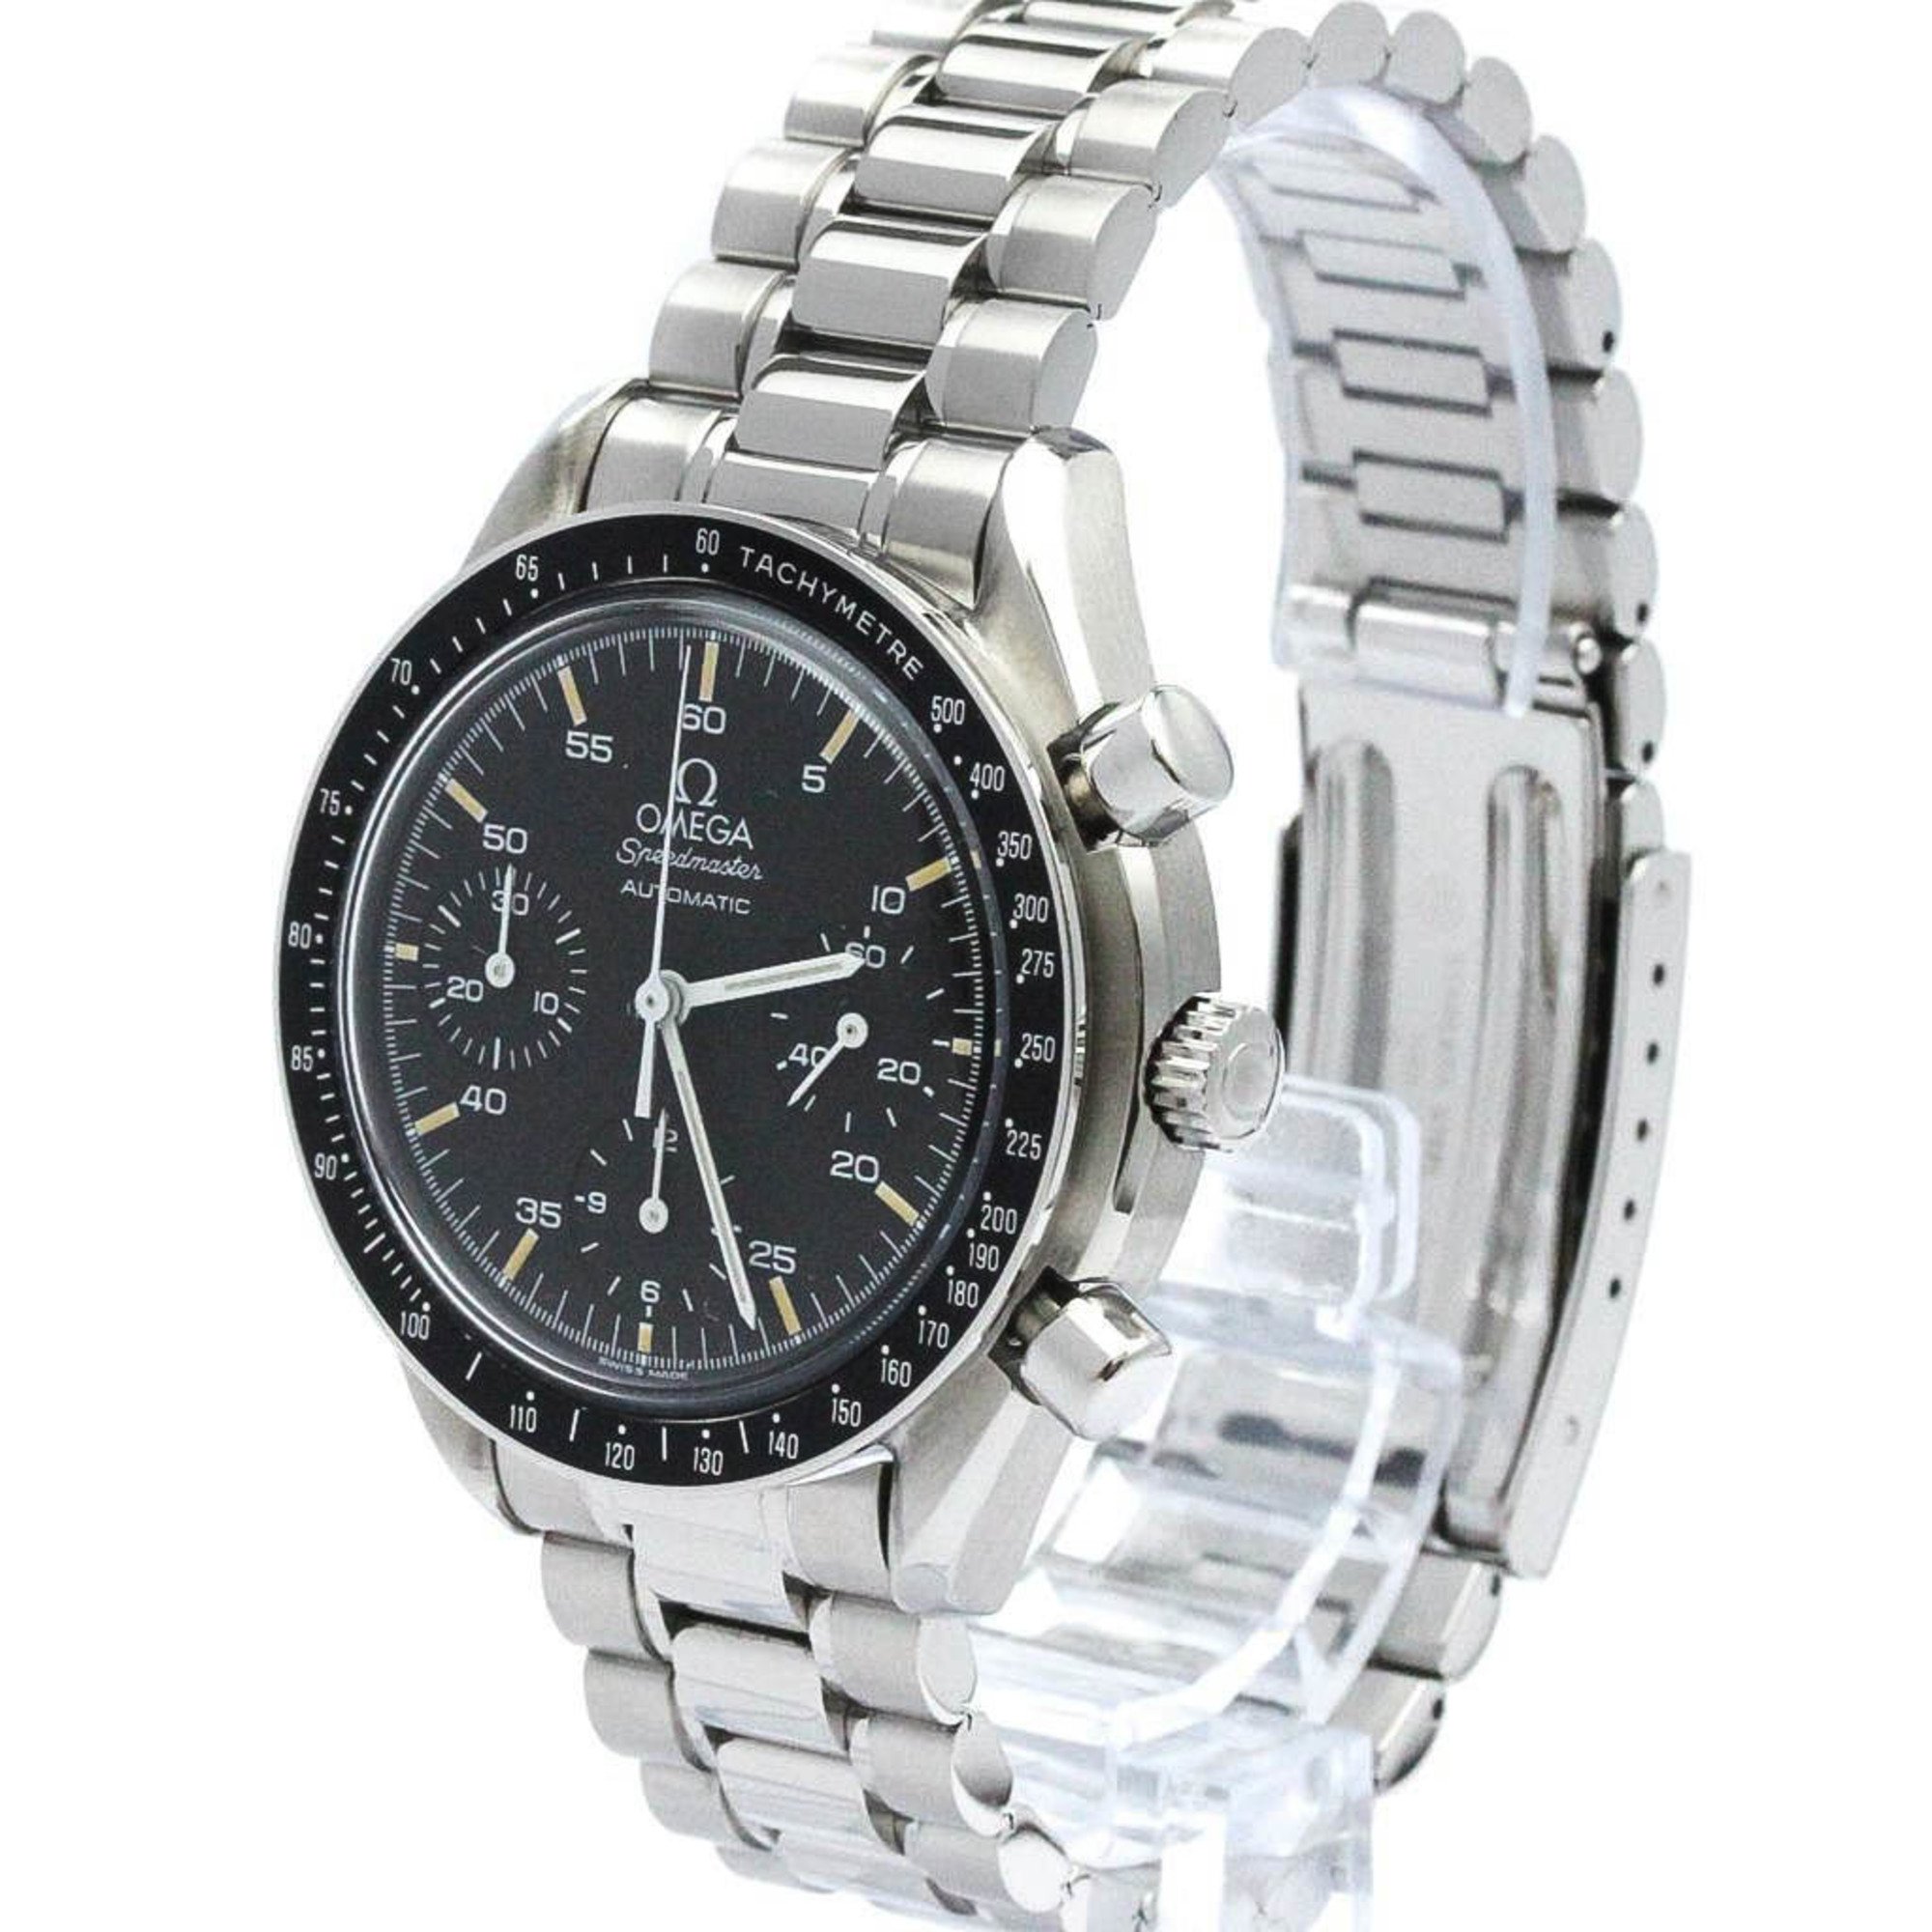 Polished OMEGA Speedmaster Automatic Steel Mens Watch 3510.50 BF565485